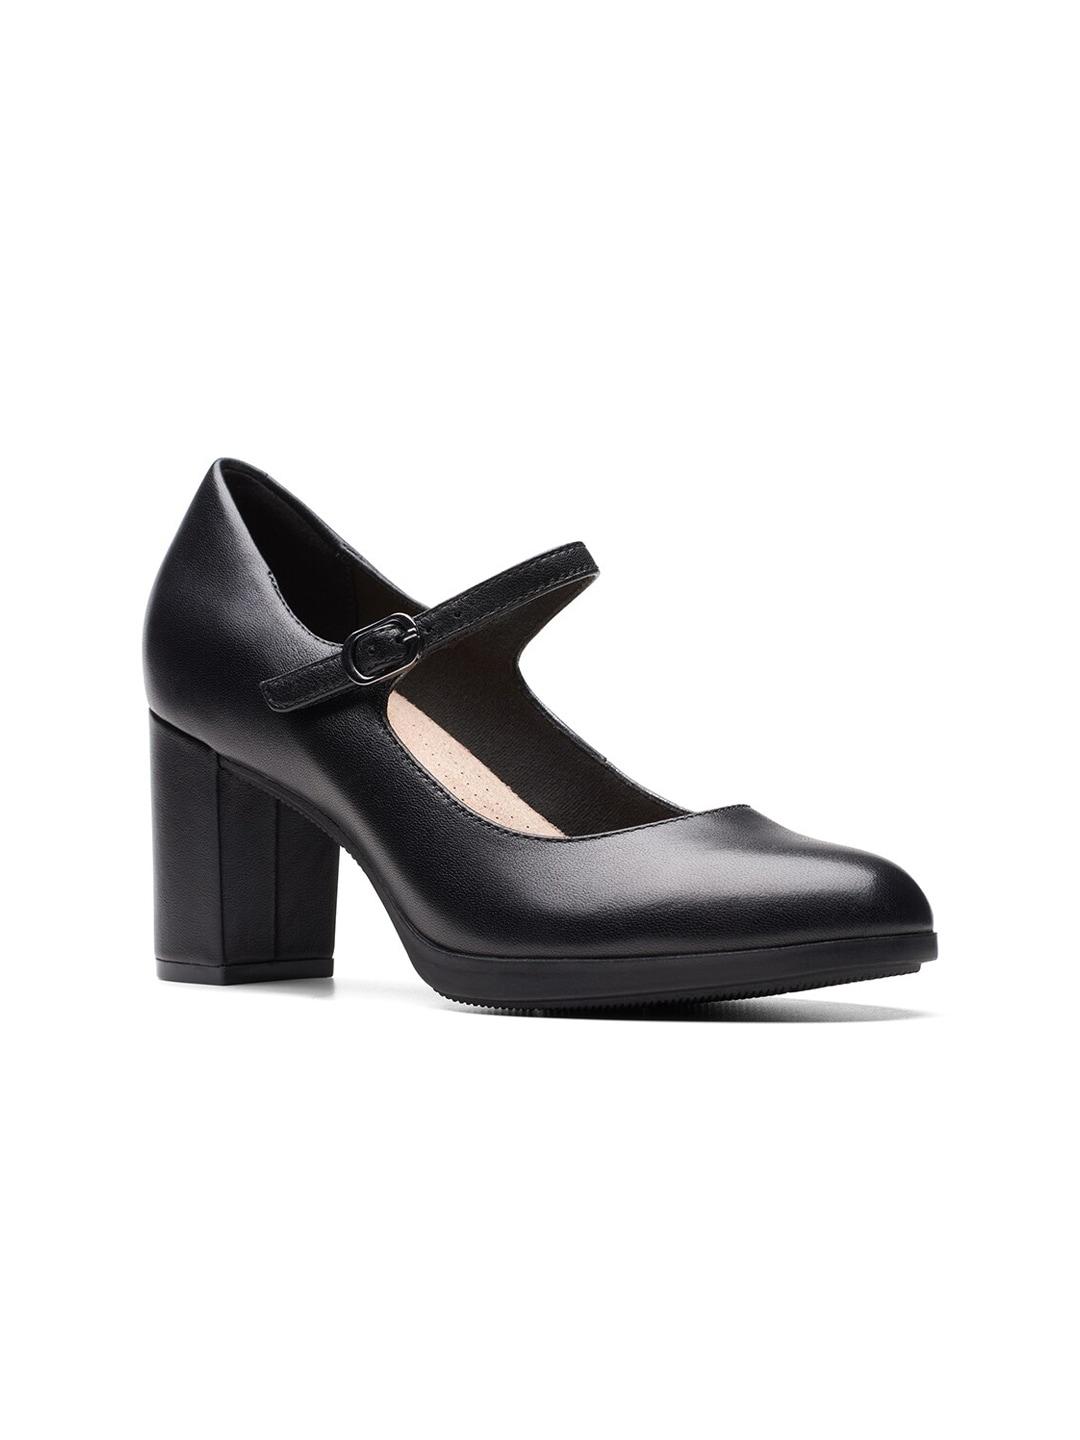 clarks leather work block pumps with buckle closure